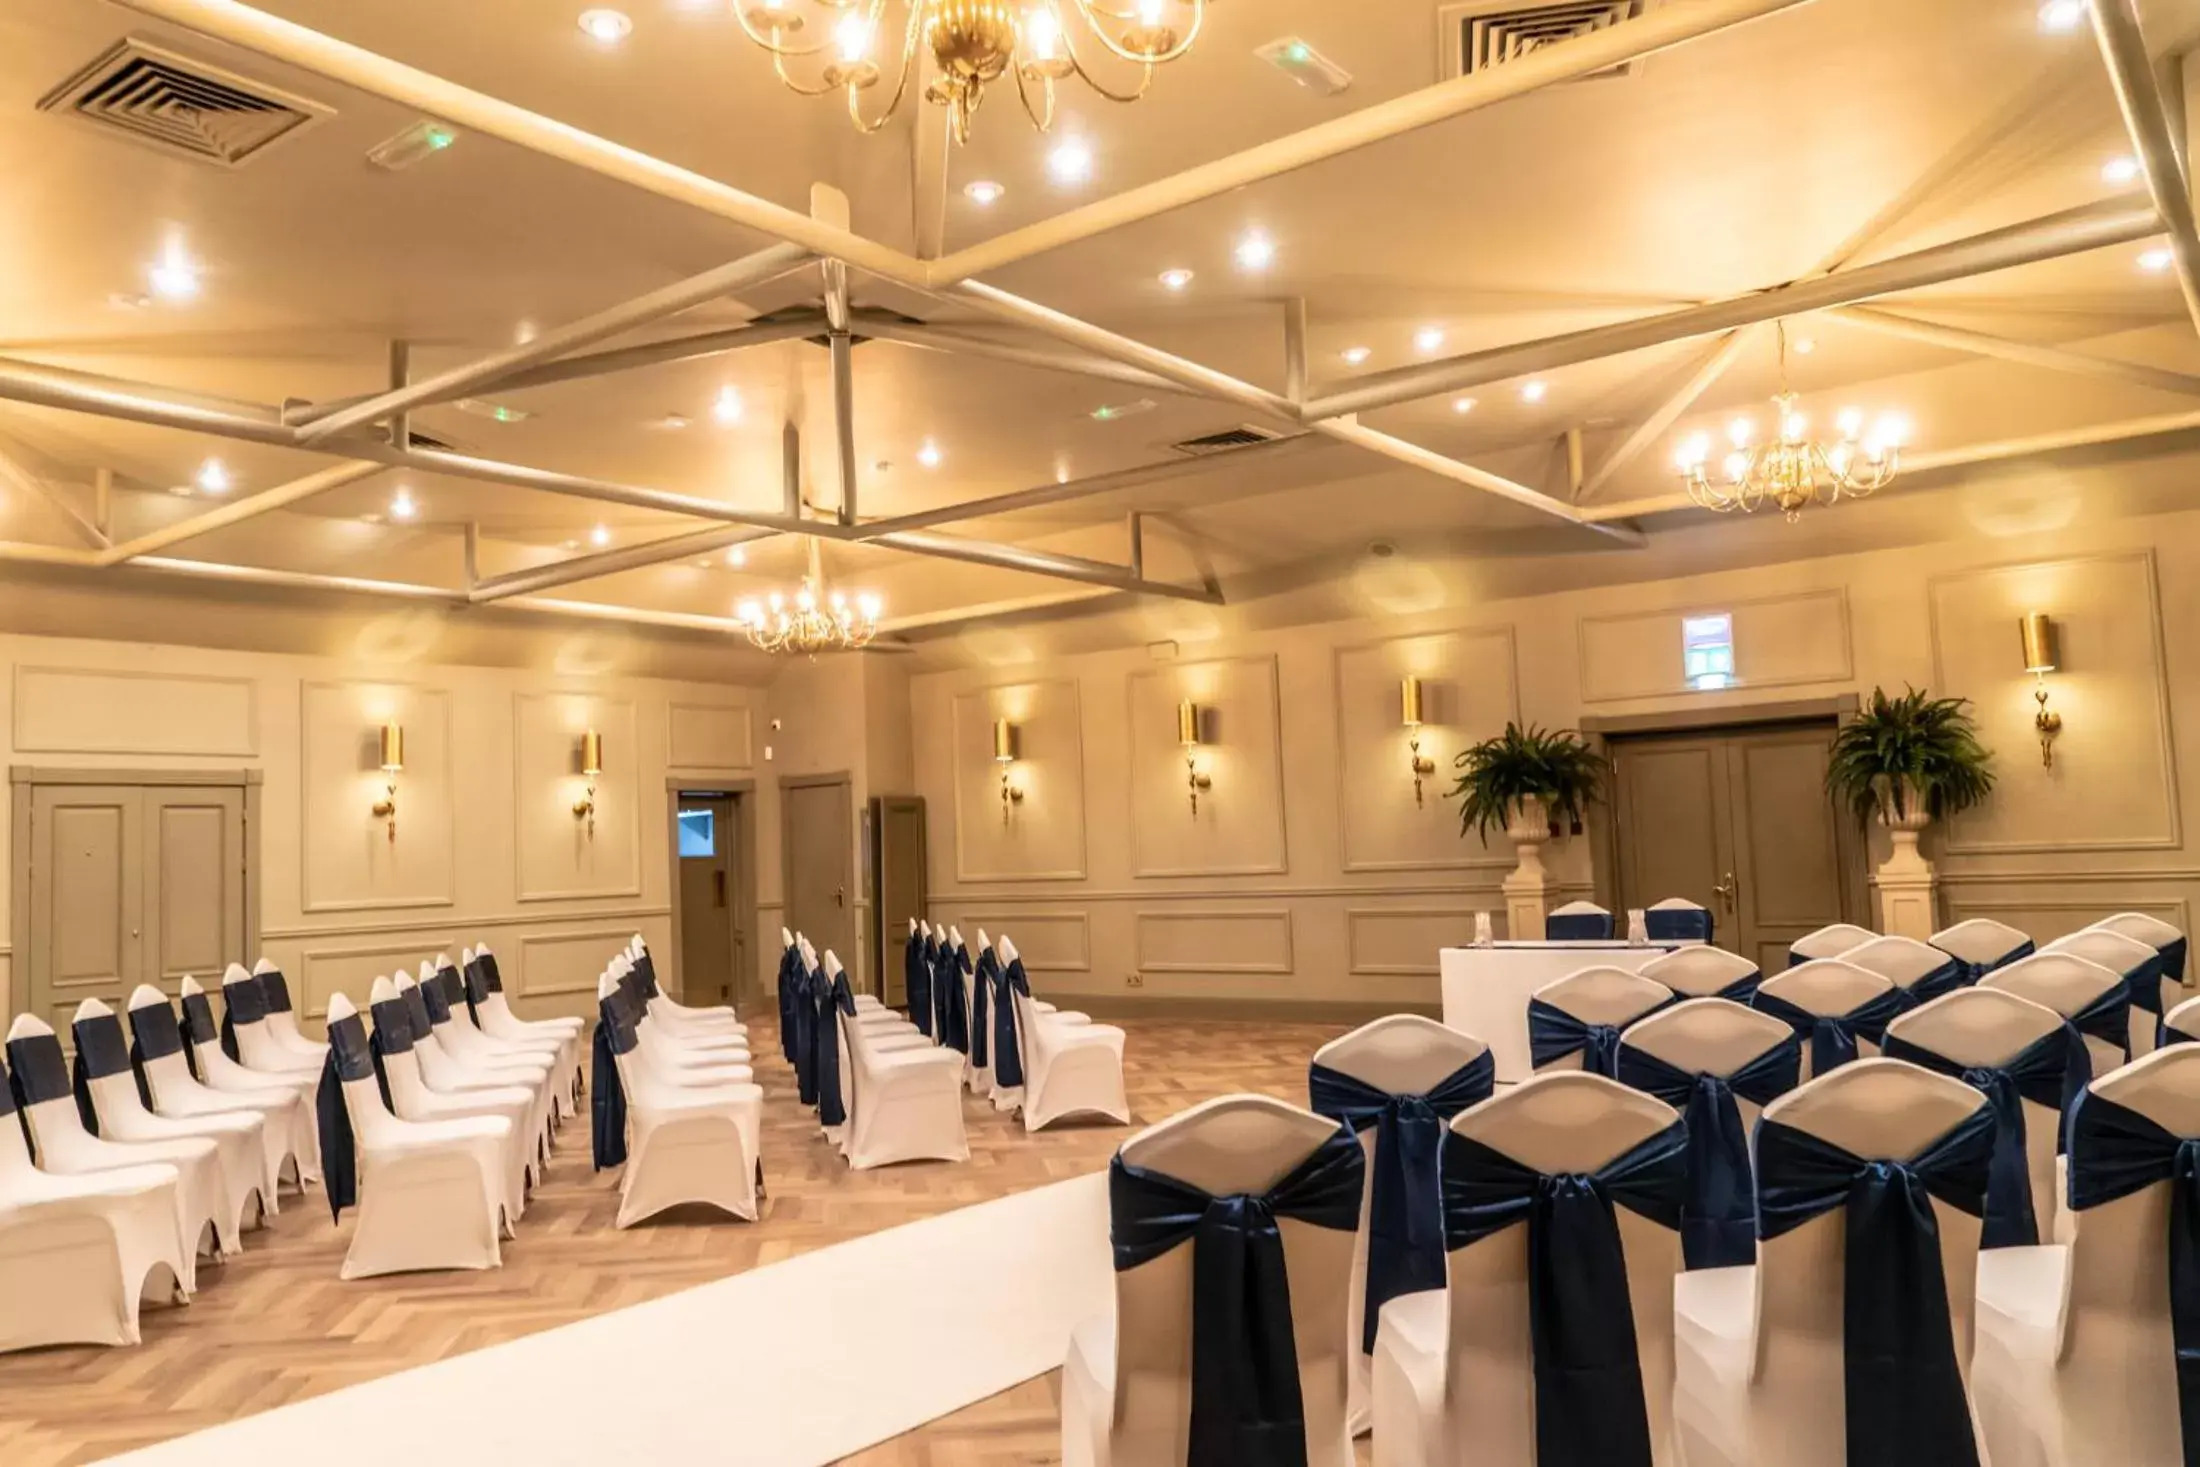 Banquet/Function facilities, Banquet Facilities in The Briar Court Hotel